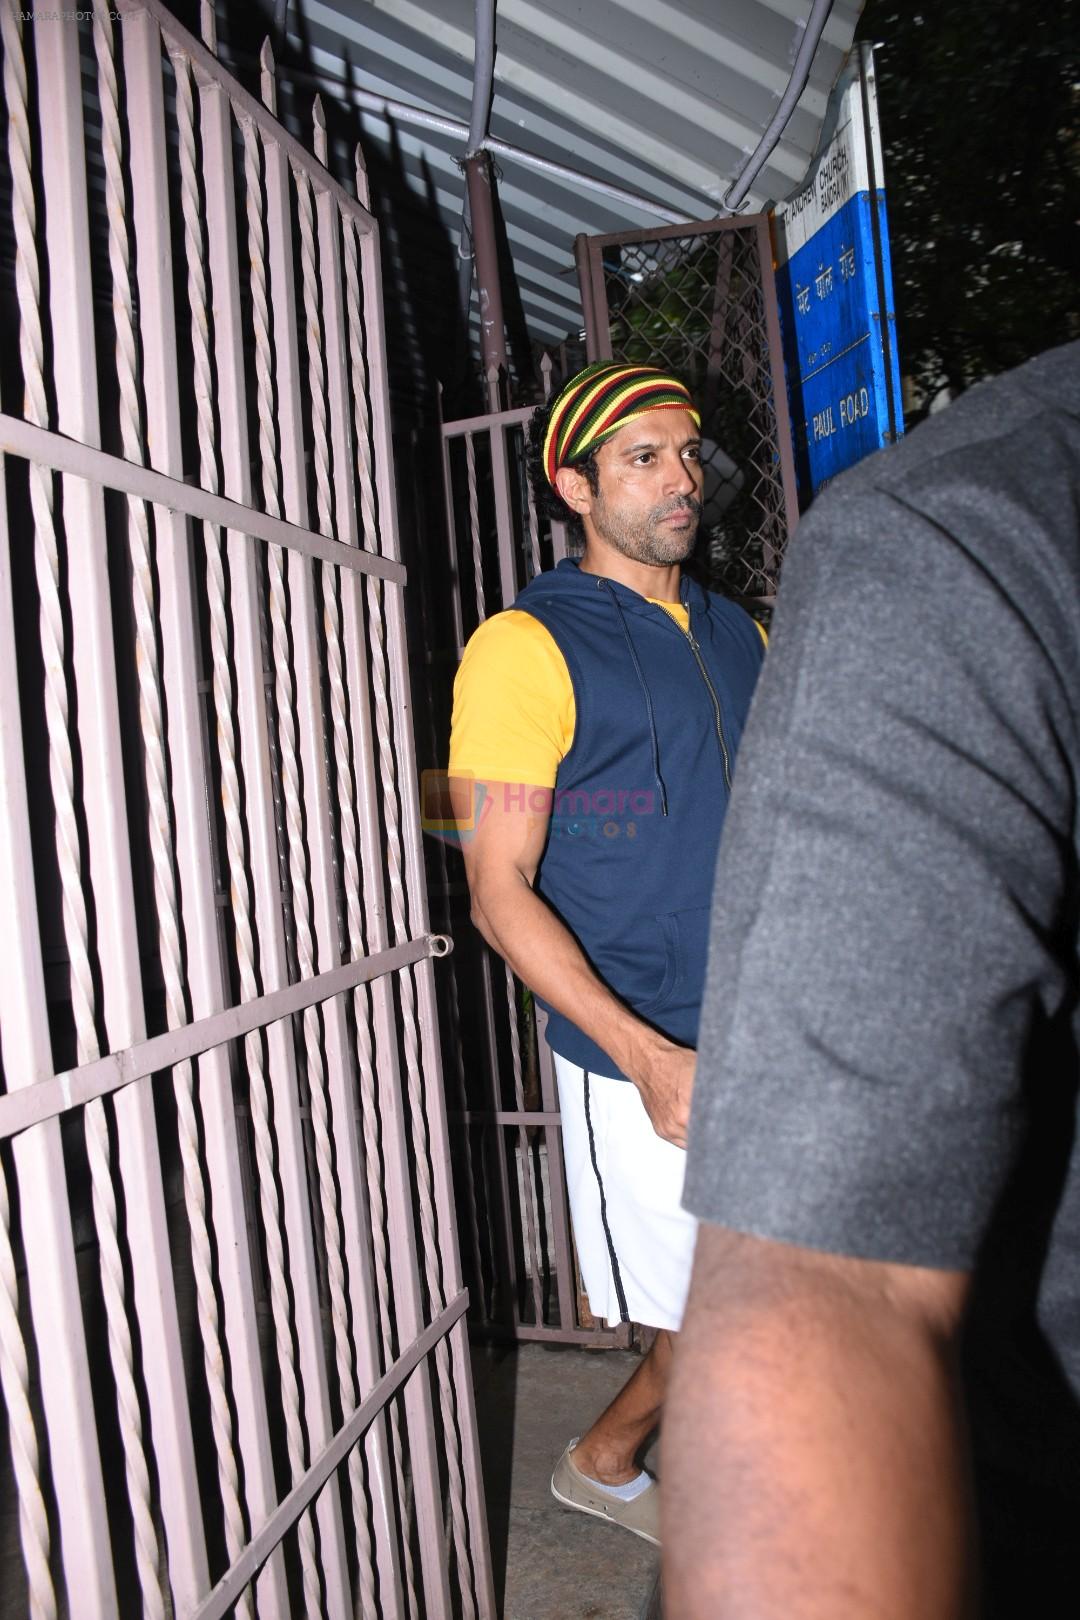 Farhan Akhtar spotted at dubbing studio in bandra on 6th Aug 2019